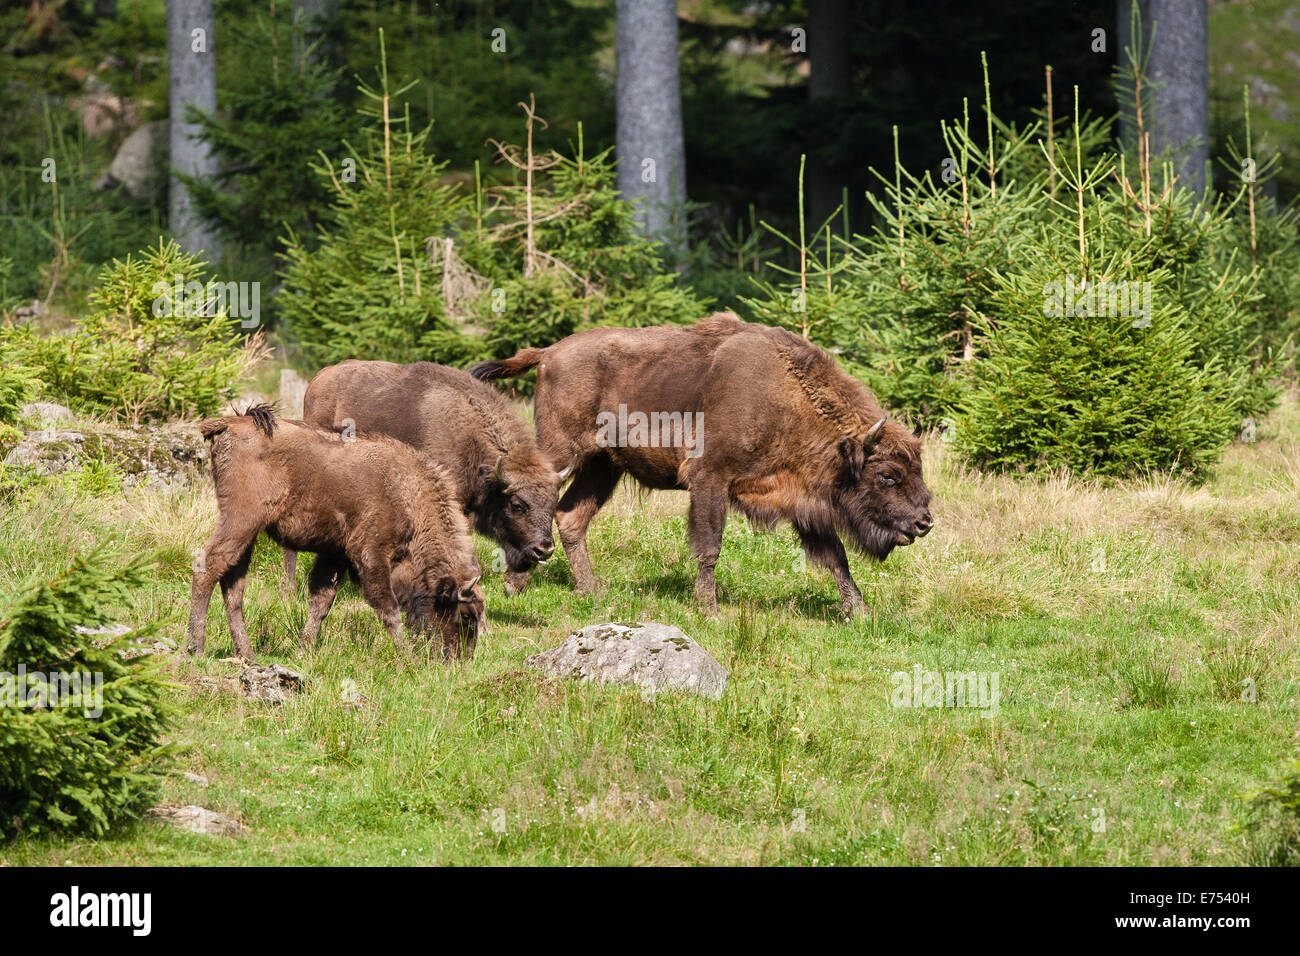 Captive European Bison in Germany Stock Photo